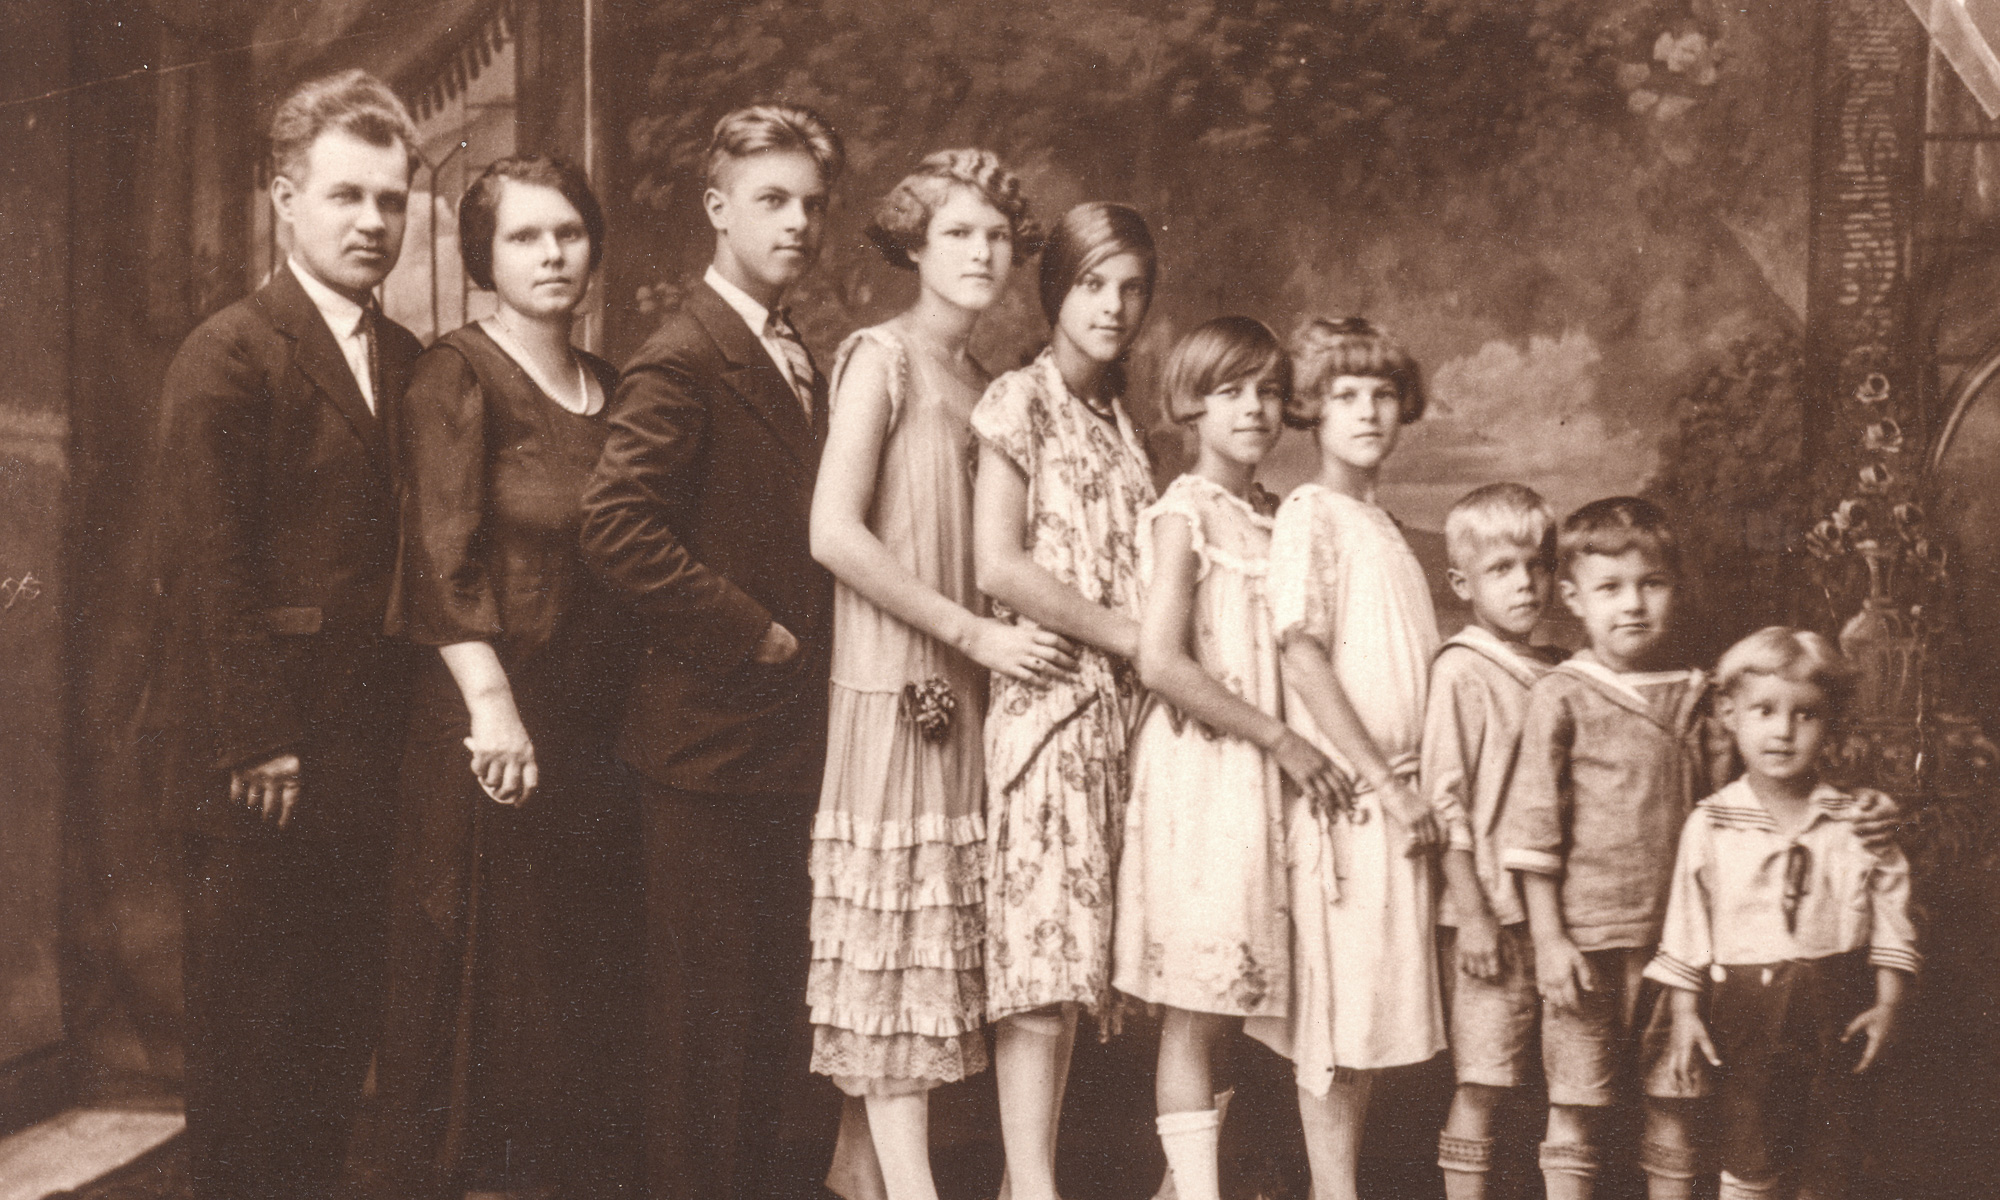 Poltrack Family portrait taken in the early 1920s in Stamford, CT